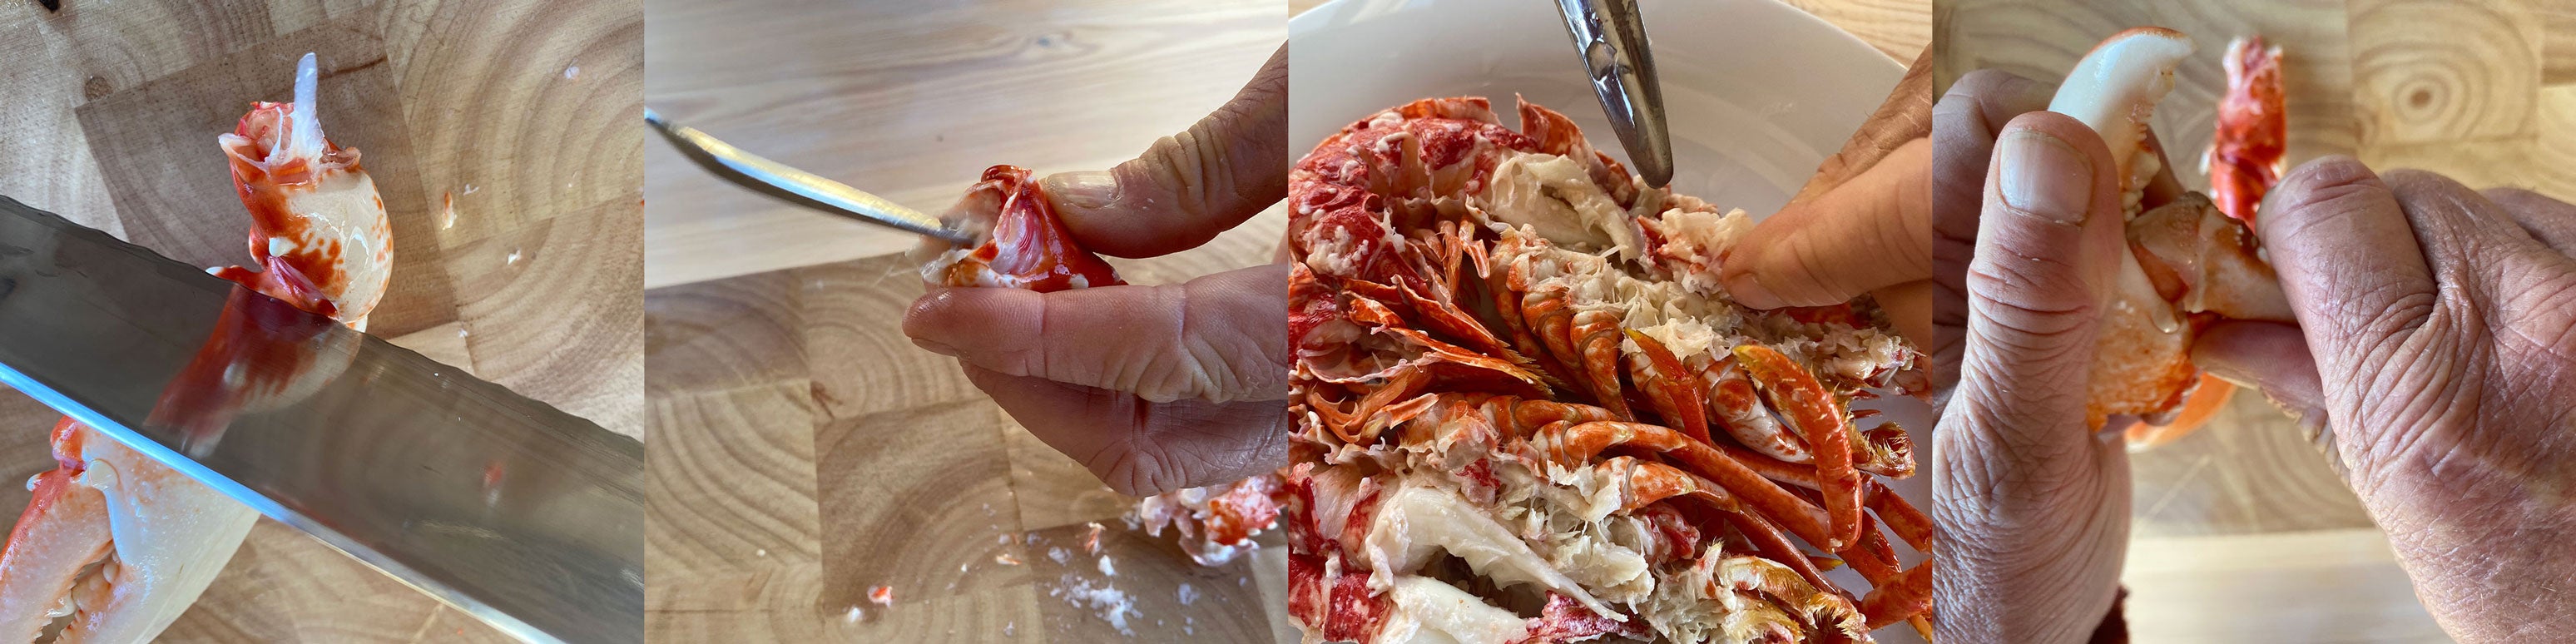 Remove the meat from the claws and place into the head cavity.